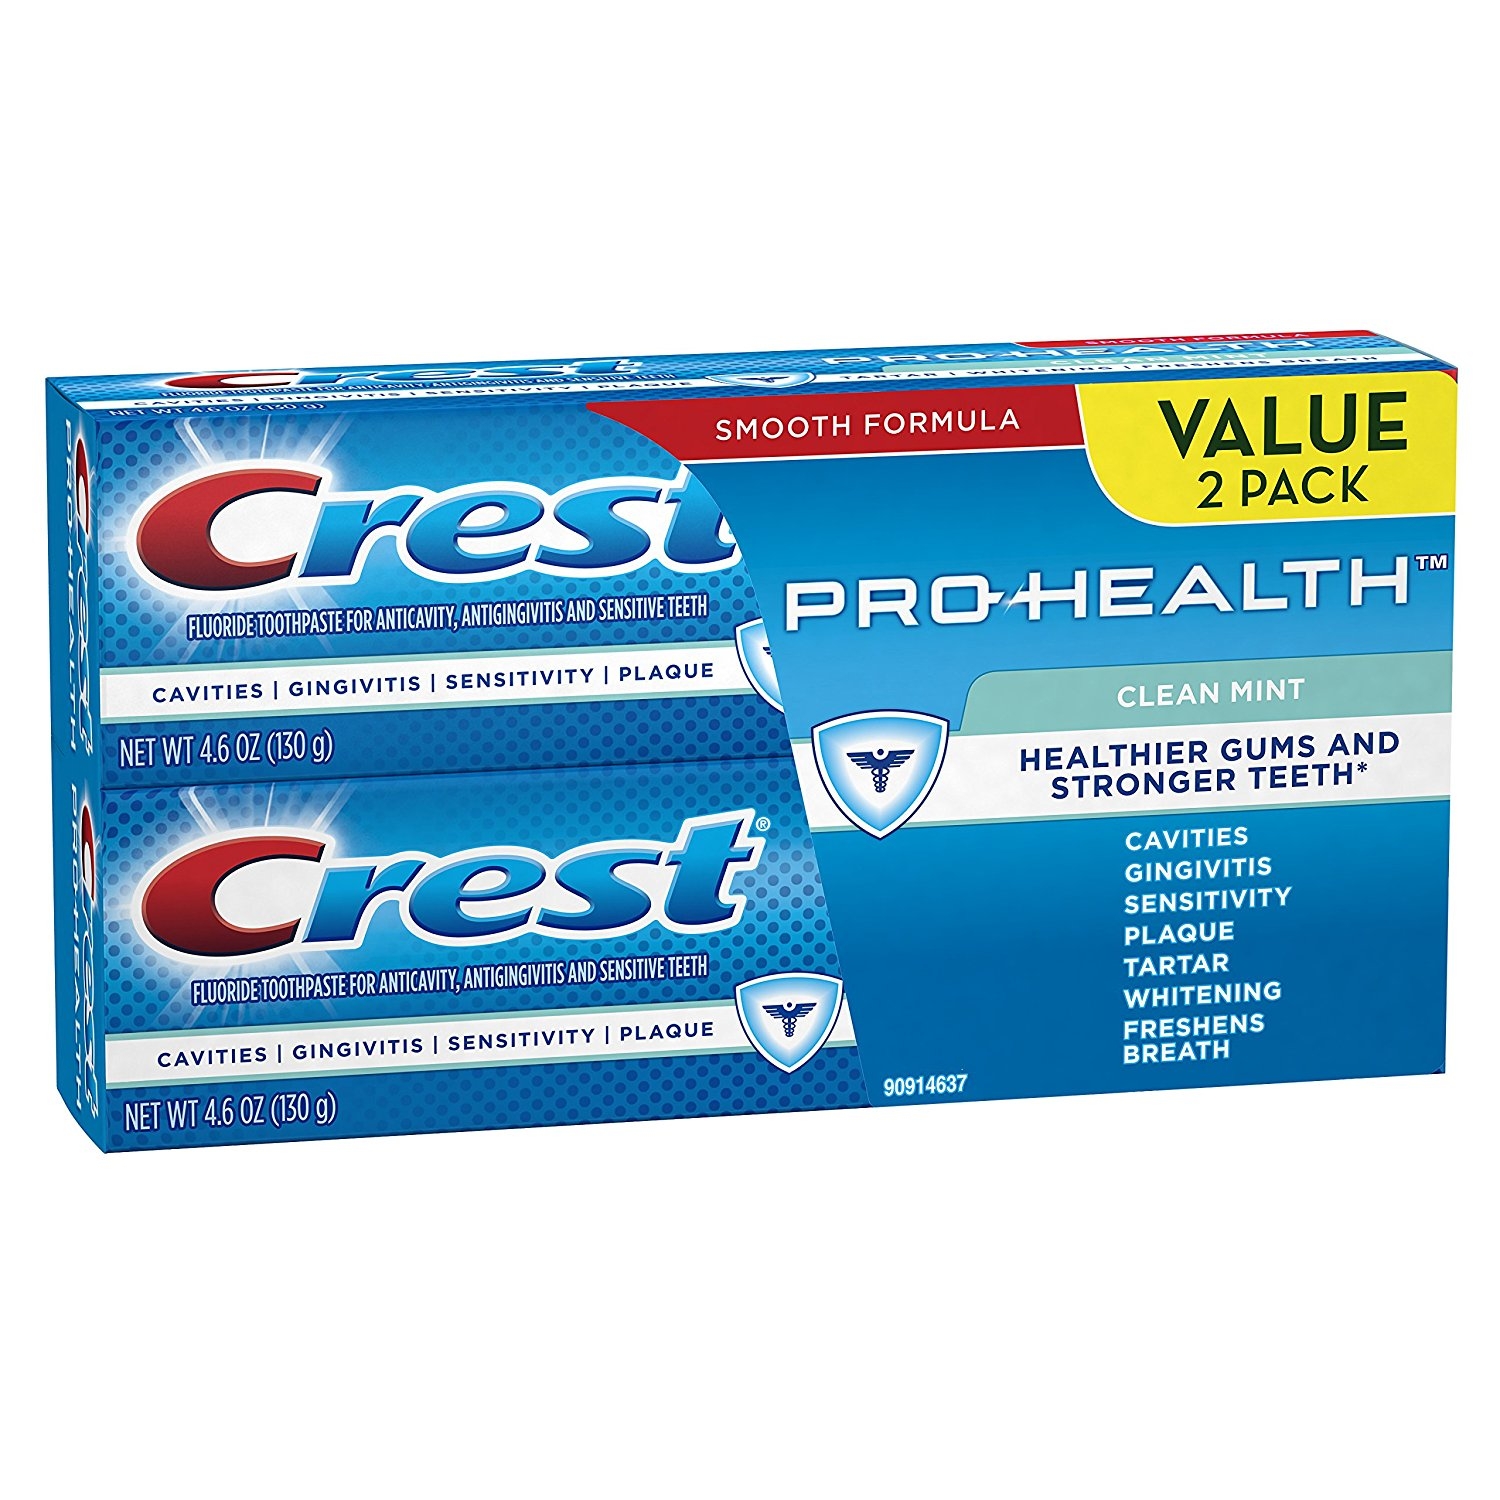 Crest Pro-Health Clean Mint Toothpaste, 4.6oz, Twin Pack - image 3 of 9